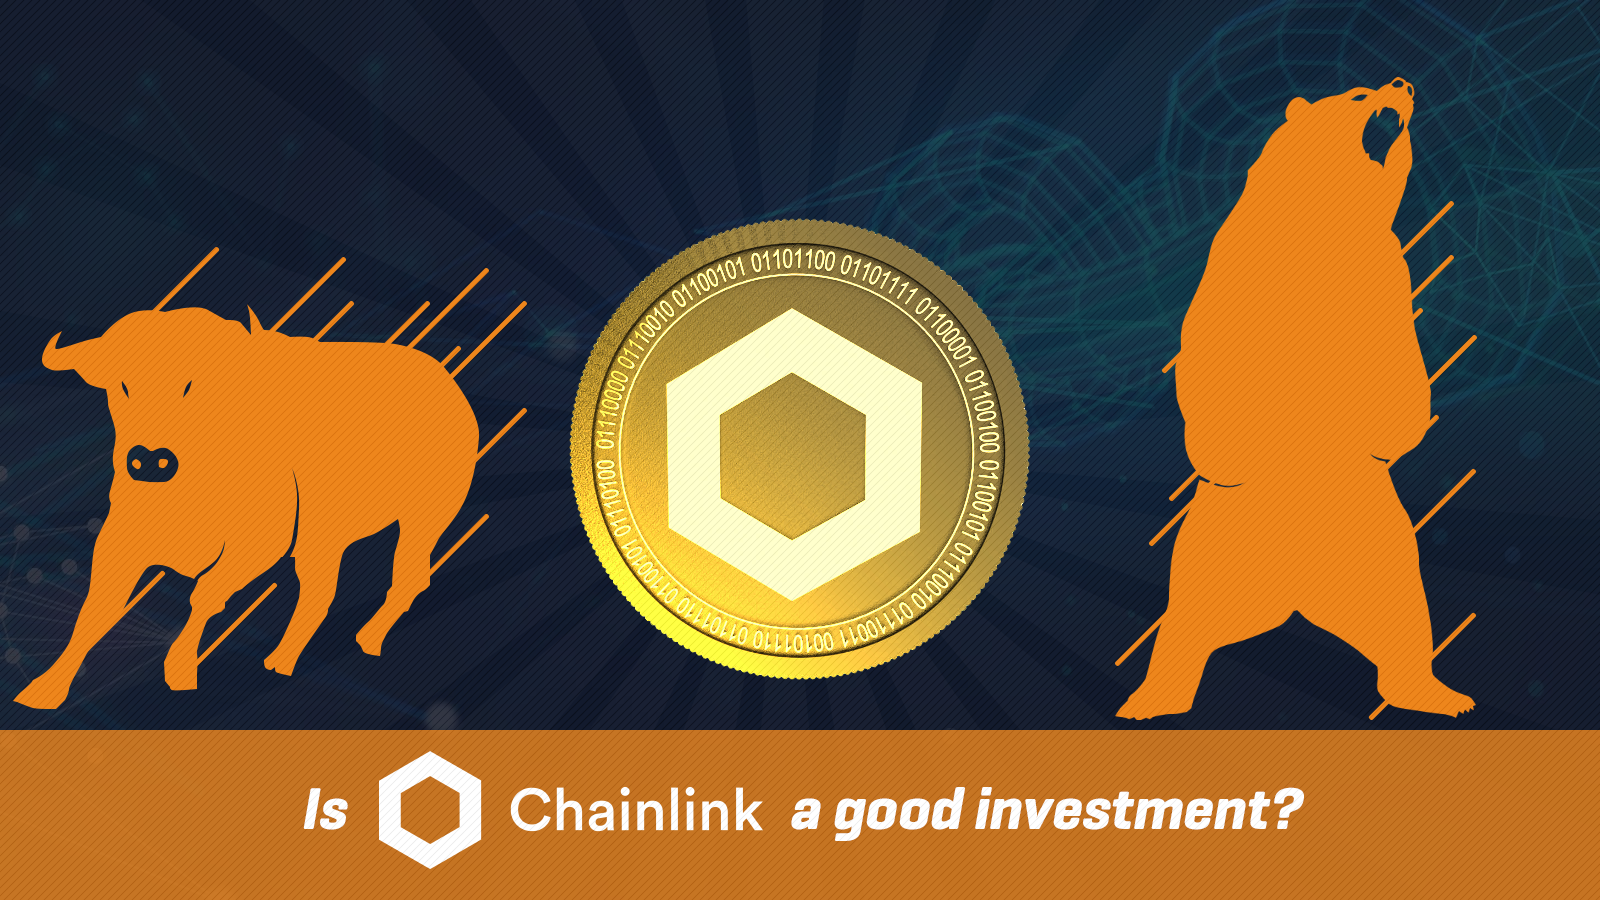 What is Chainlink and Is It a Good Investment?